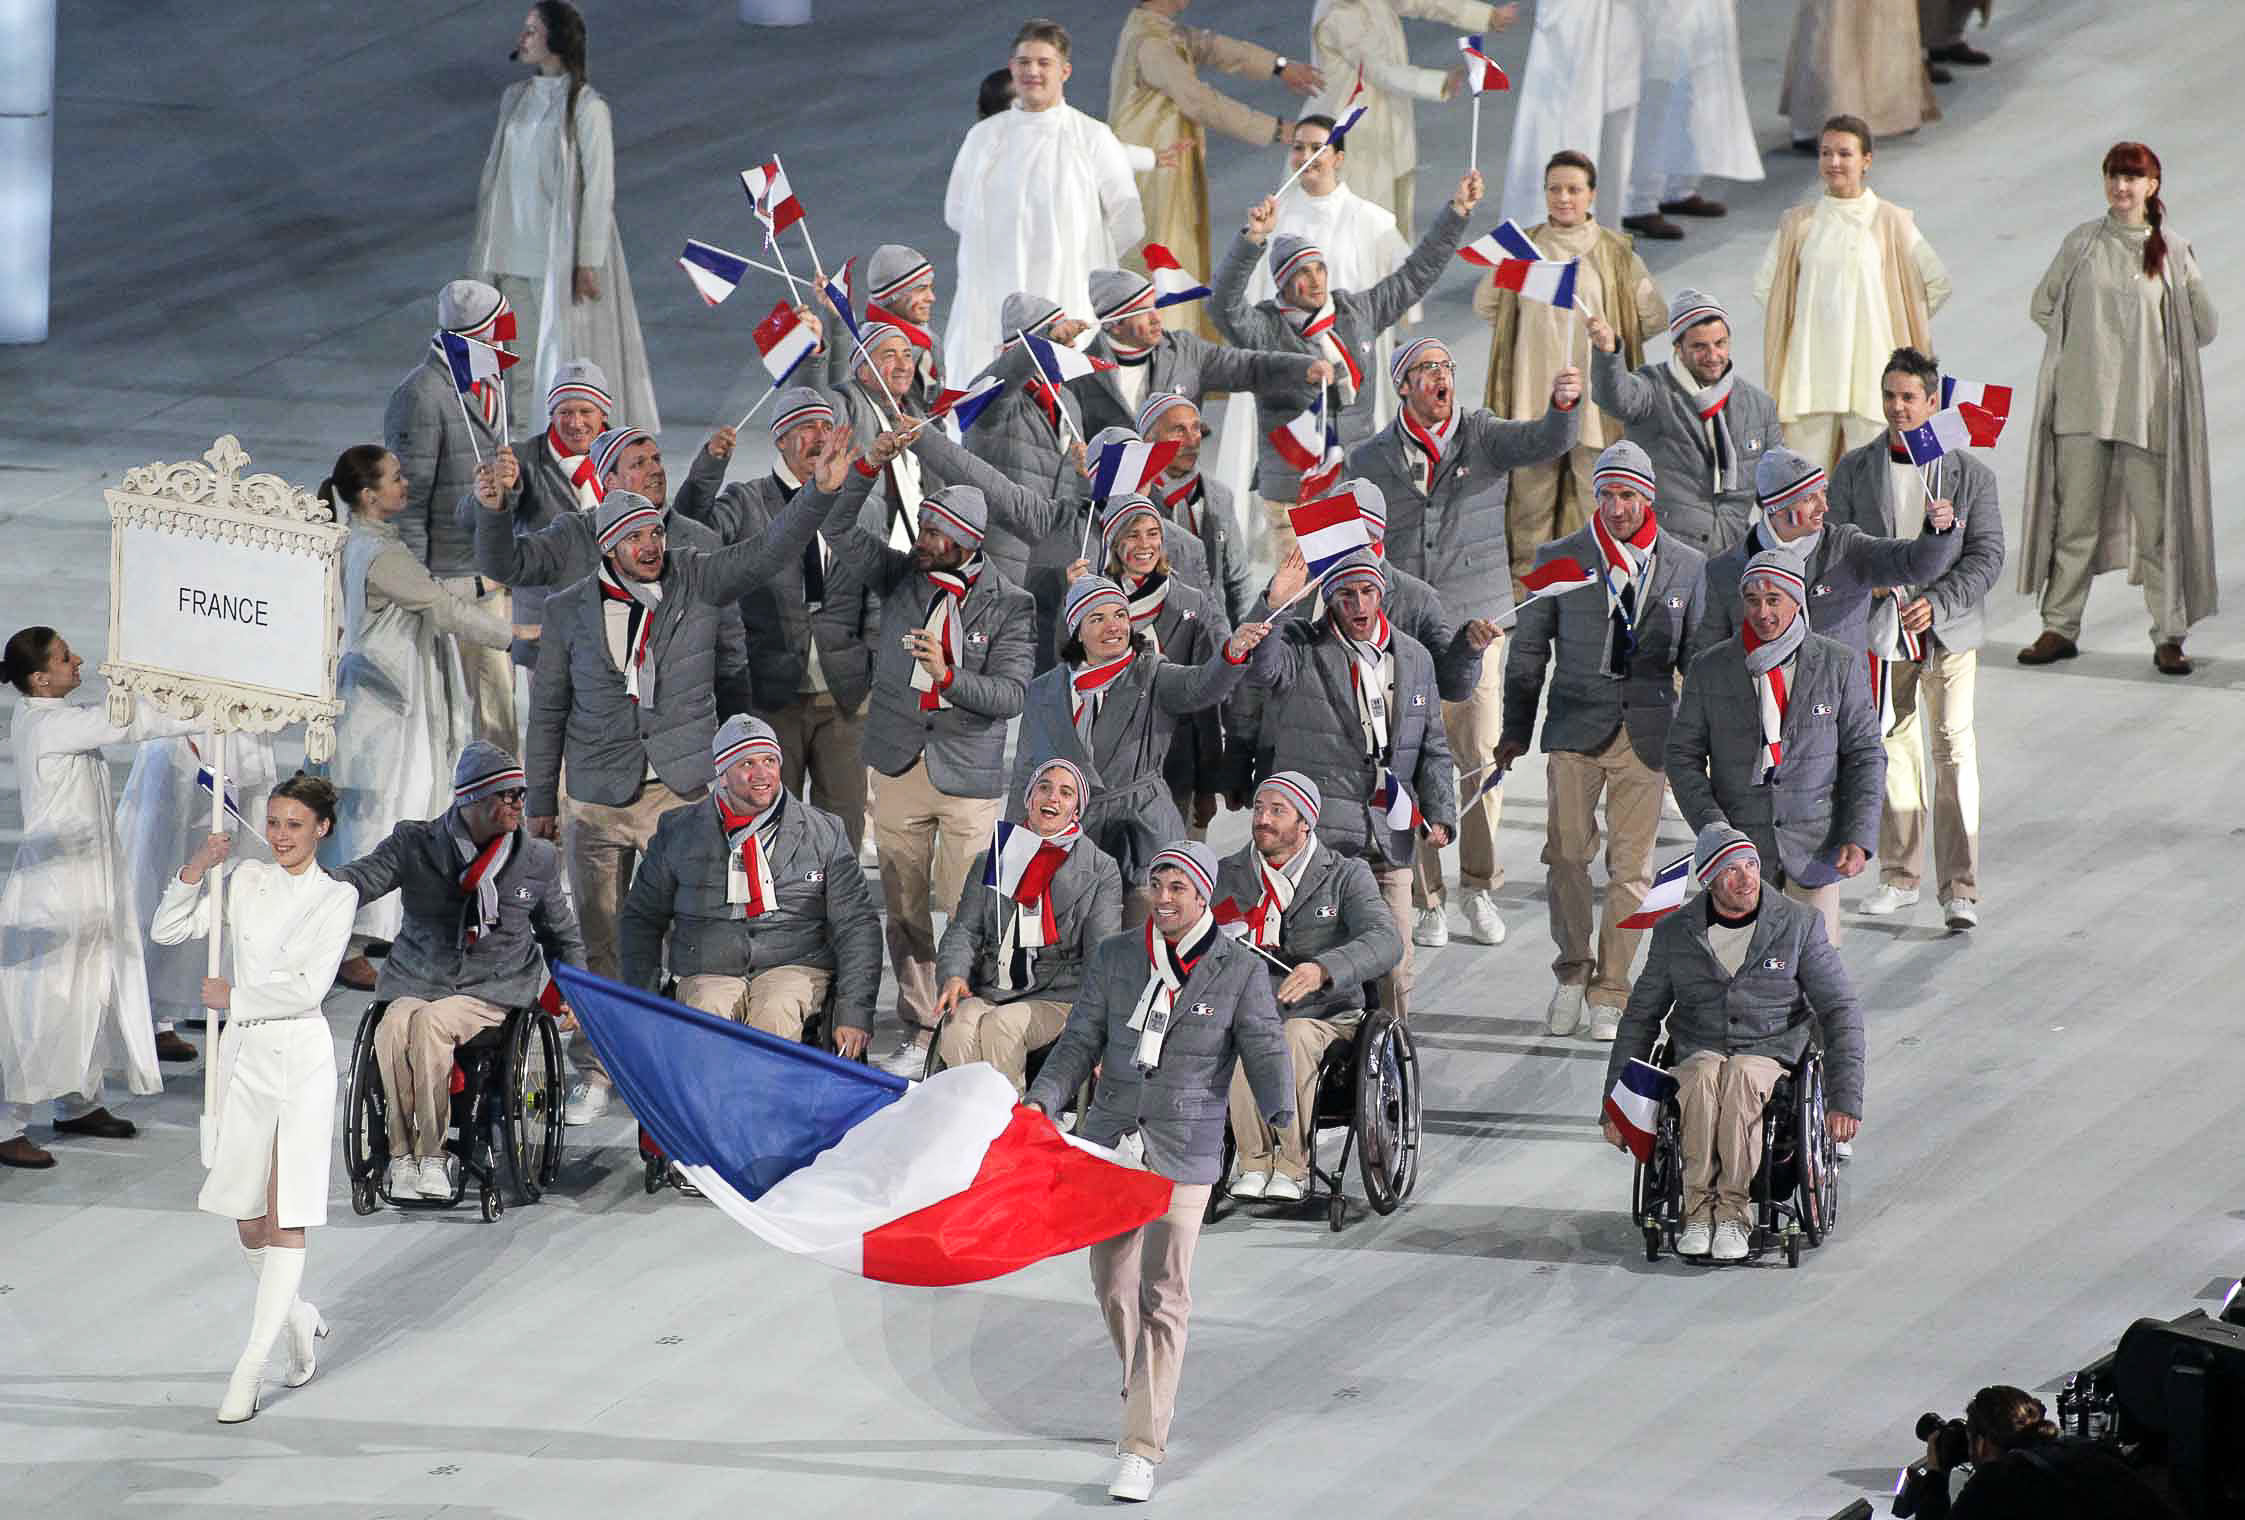 The French team at the Sochi Paralympic Games Opening Ceremony. Image: @FFH.